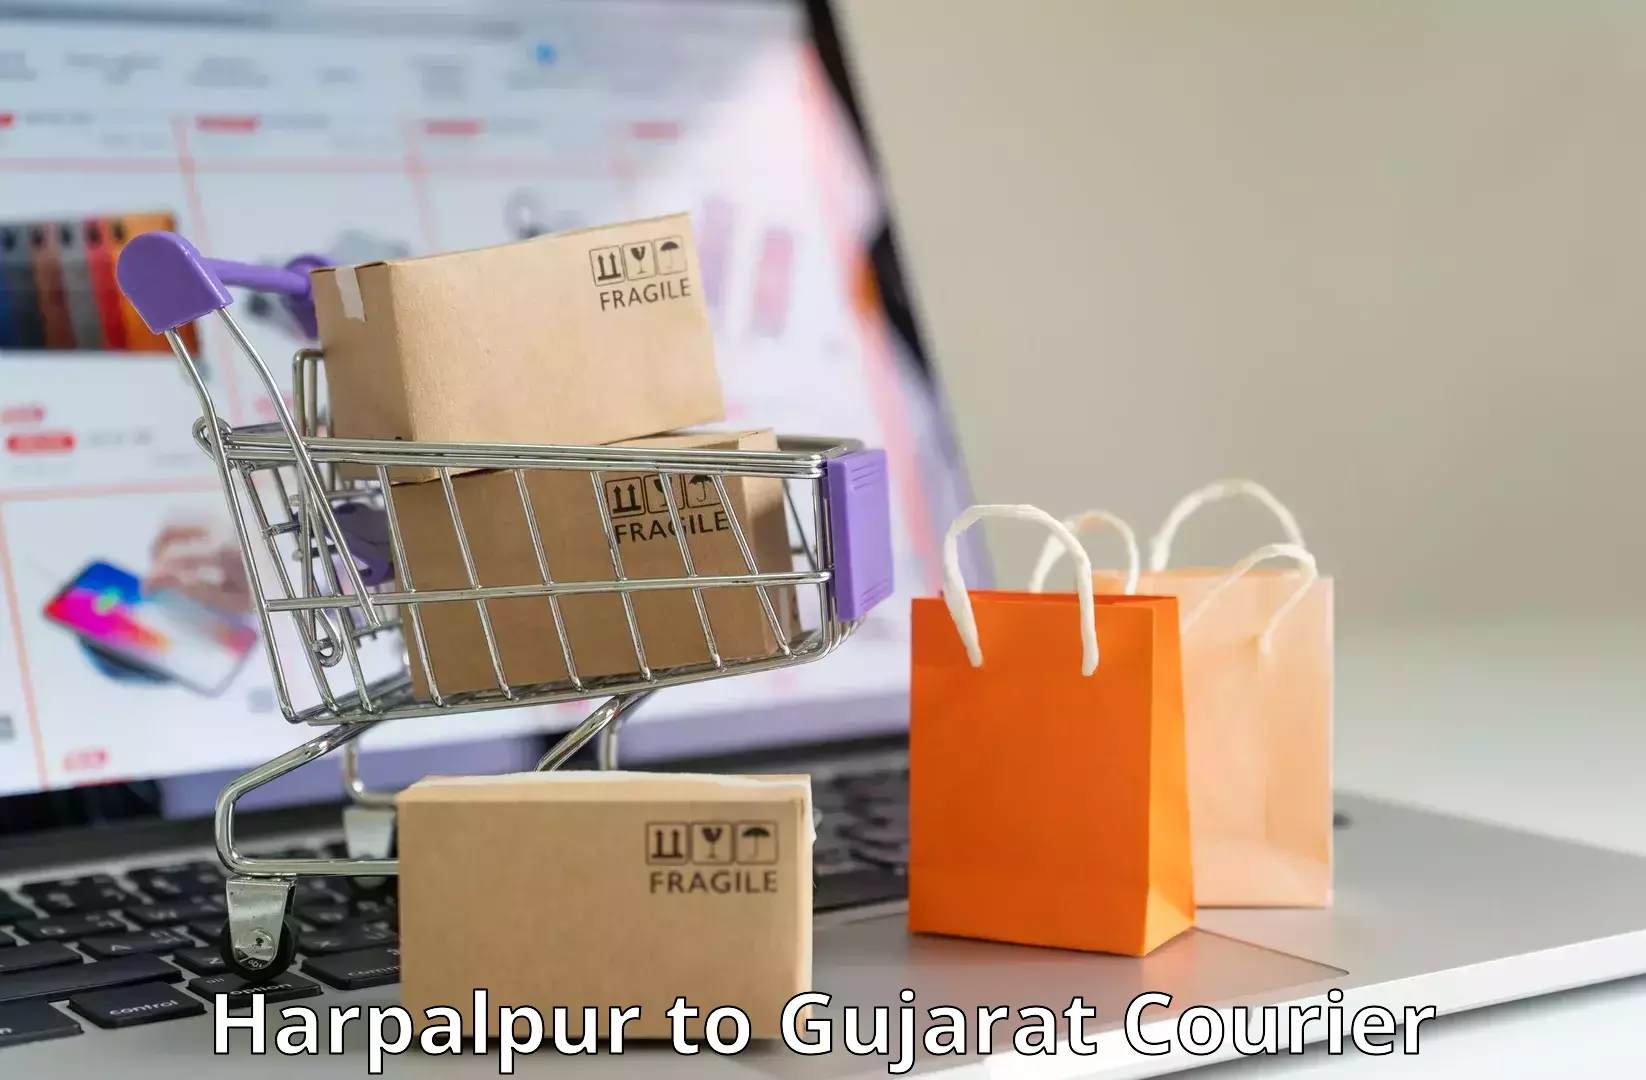 Nationwide courier service Harpalpur to Ahmedabad